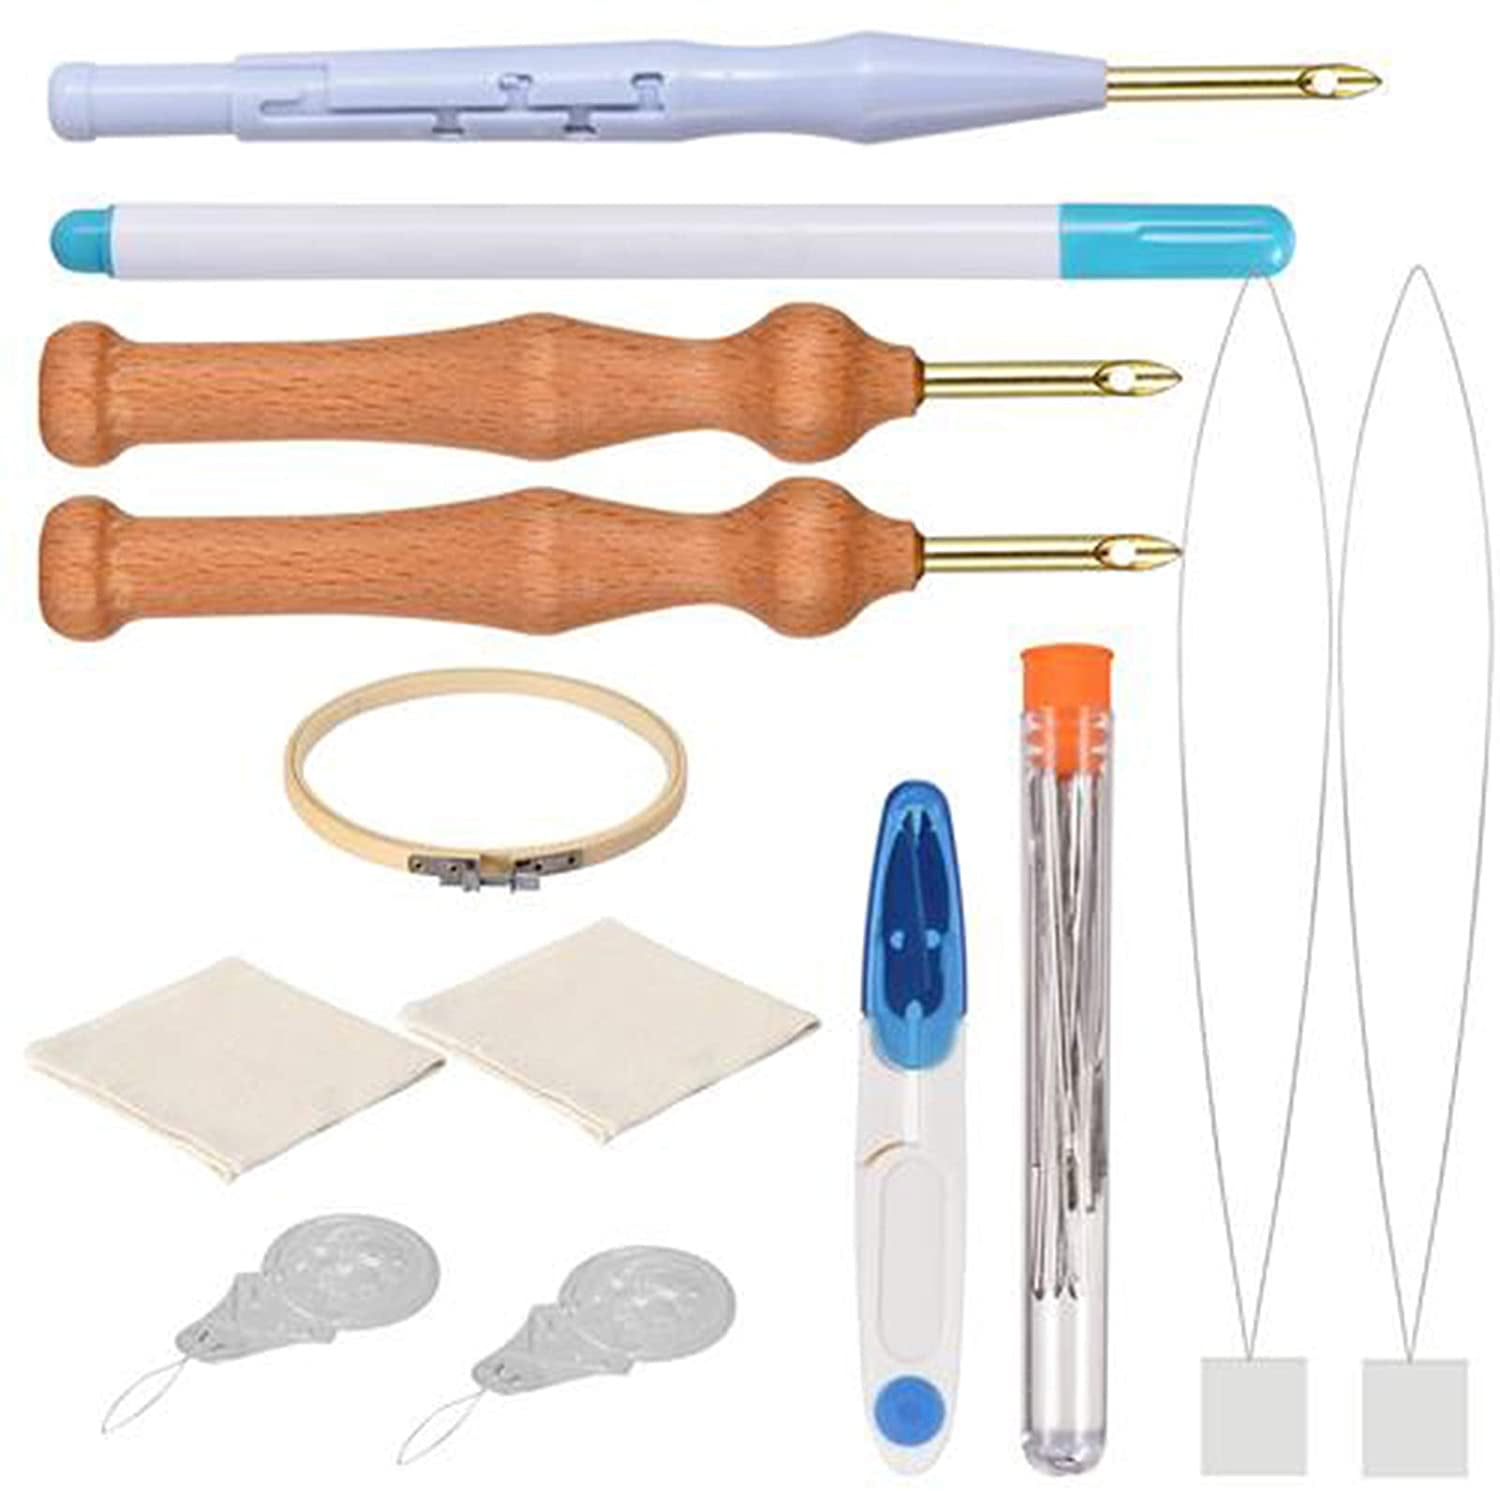 DIY Sewing Embroidery Tools for Beginners Adjustable Rug Yarn Punch Needle Wooden Handle Embroidery Pen Needle Threader 13pcs/Set 13pcs Punch Needle Embroidery Kits Punch Needle Cloth